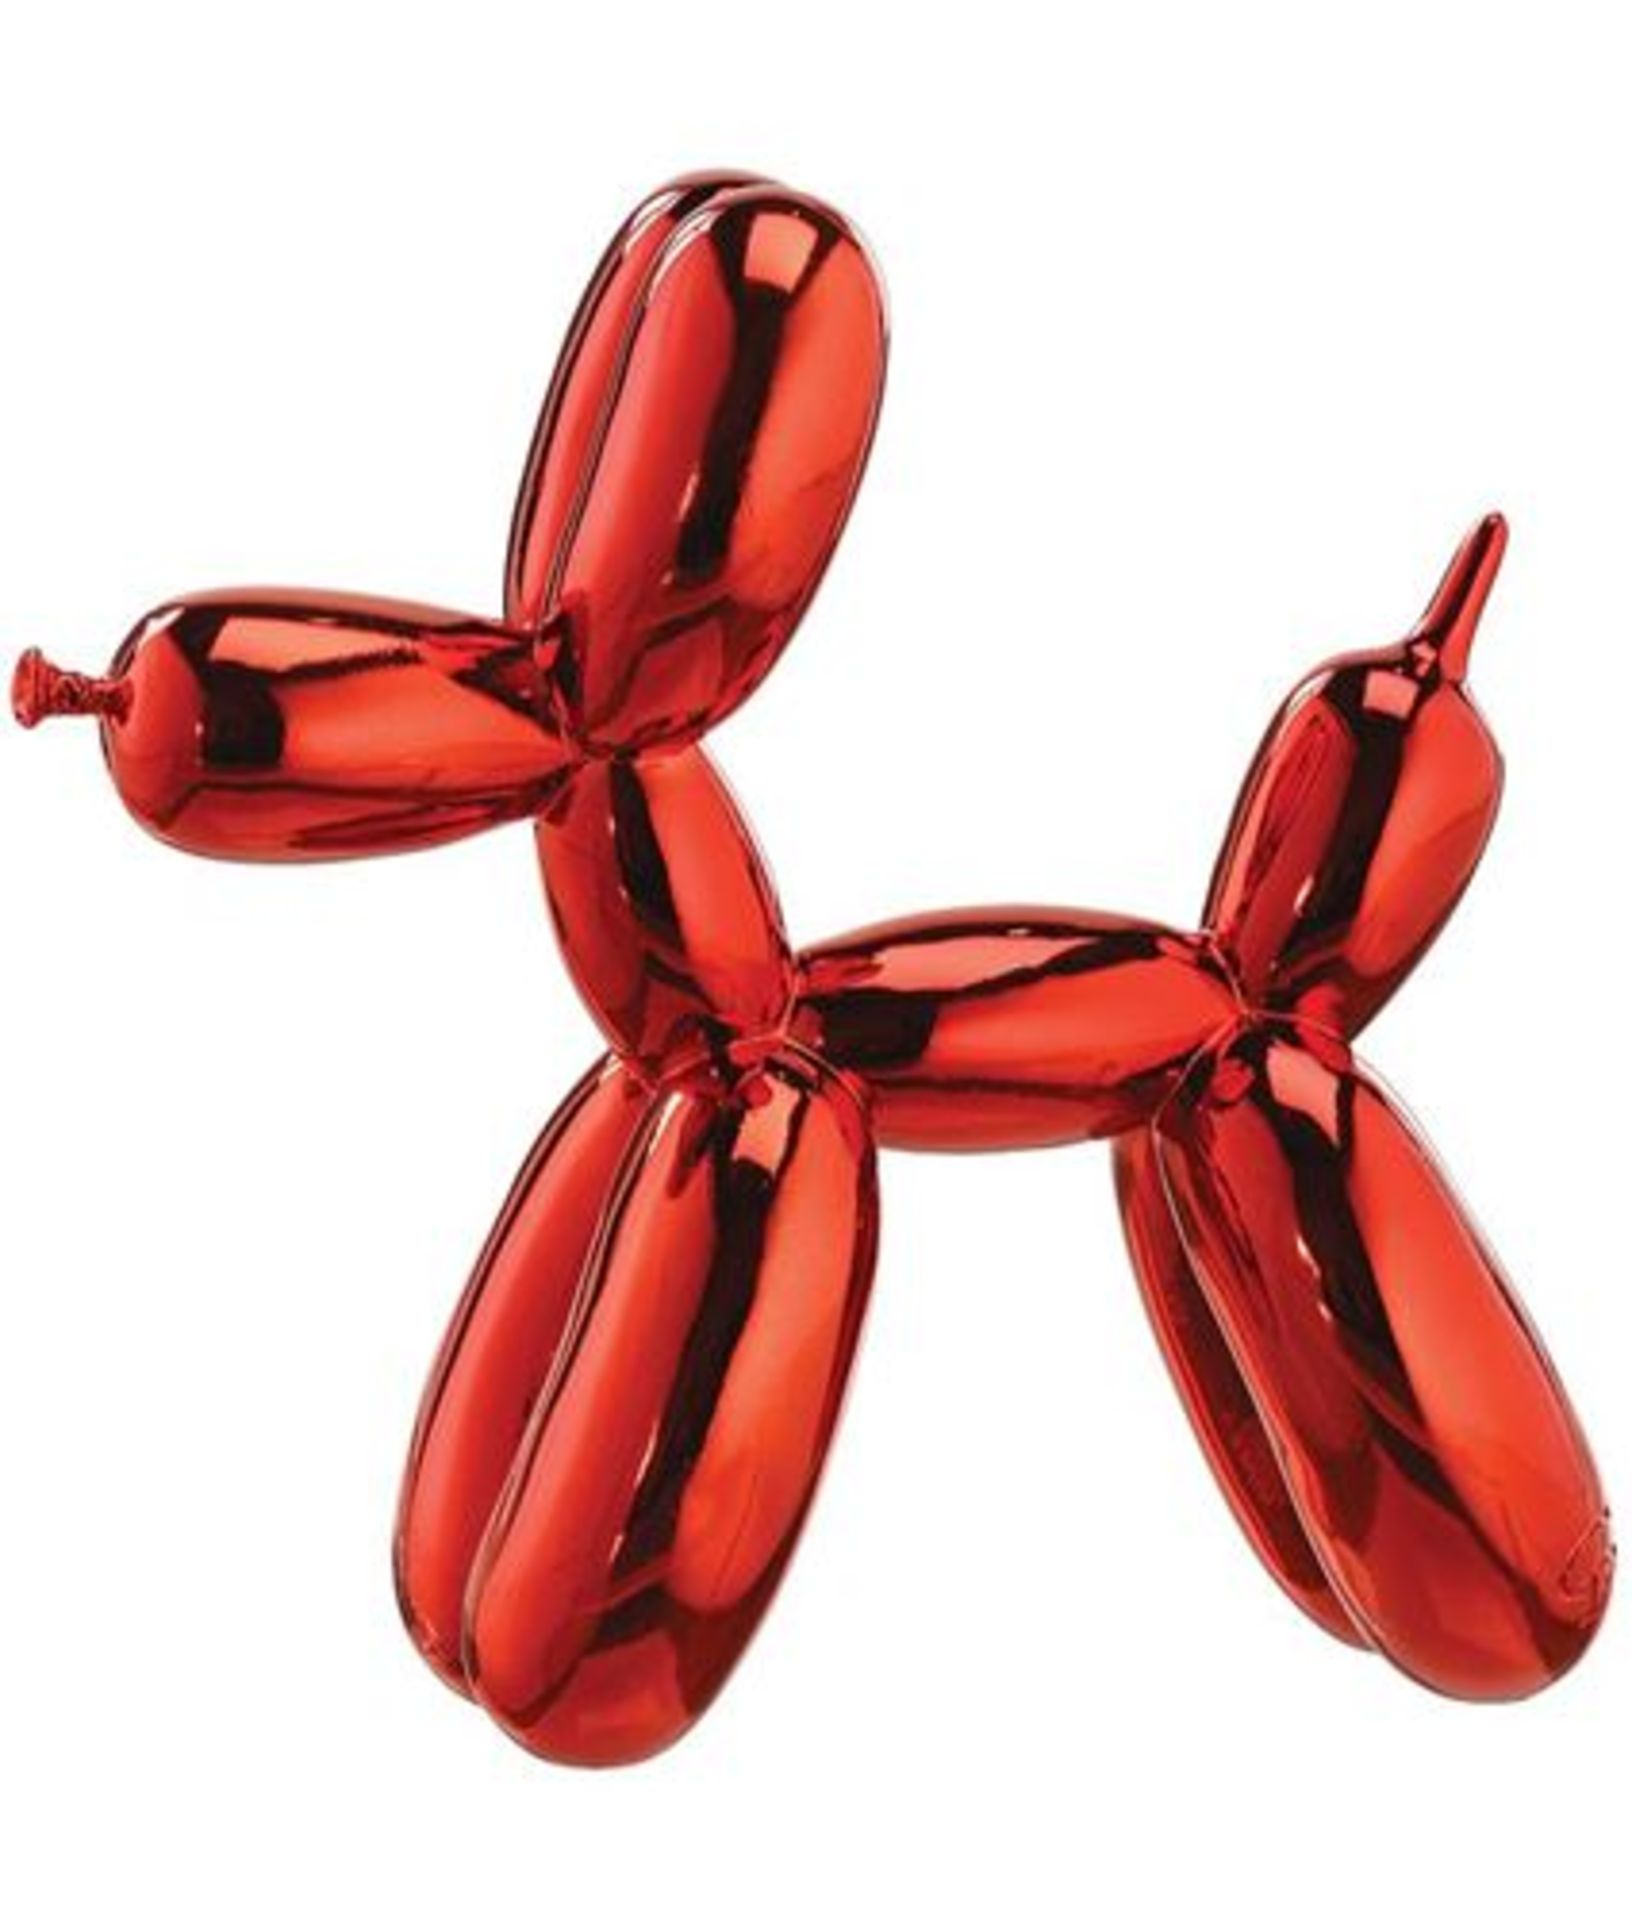 Jeff Koons "BALLOON DOG" (Red) An edition of the famous "Balloon Dog" by Jeff [...] - Bild 2 aus 2